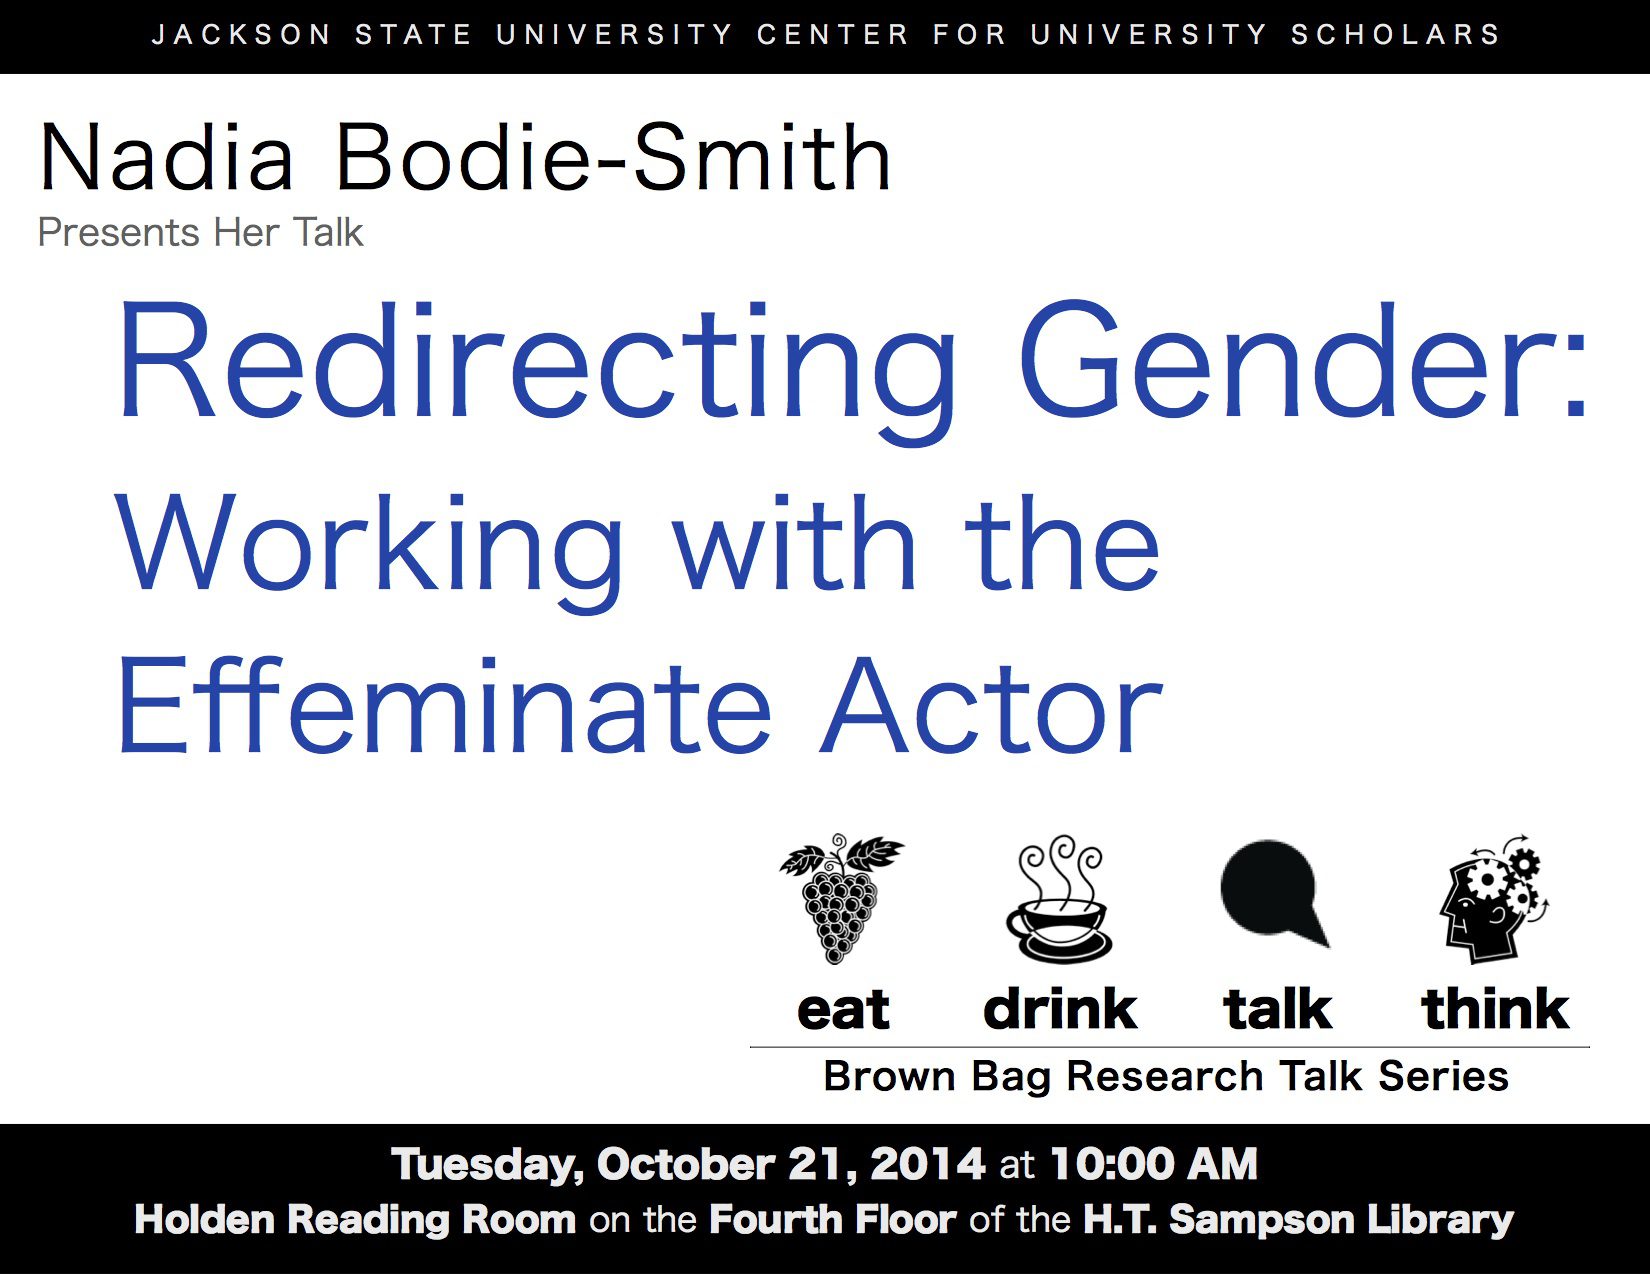 Bodie-Smith's Brown Bag Research Talk Flyer